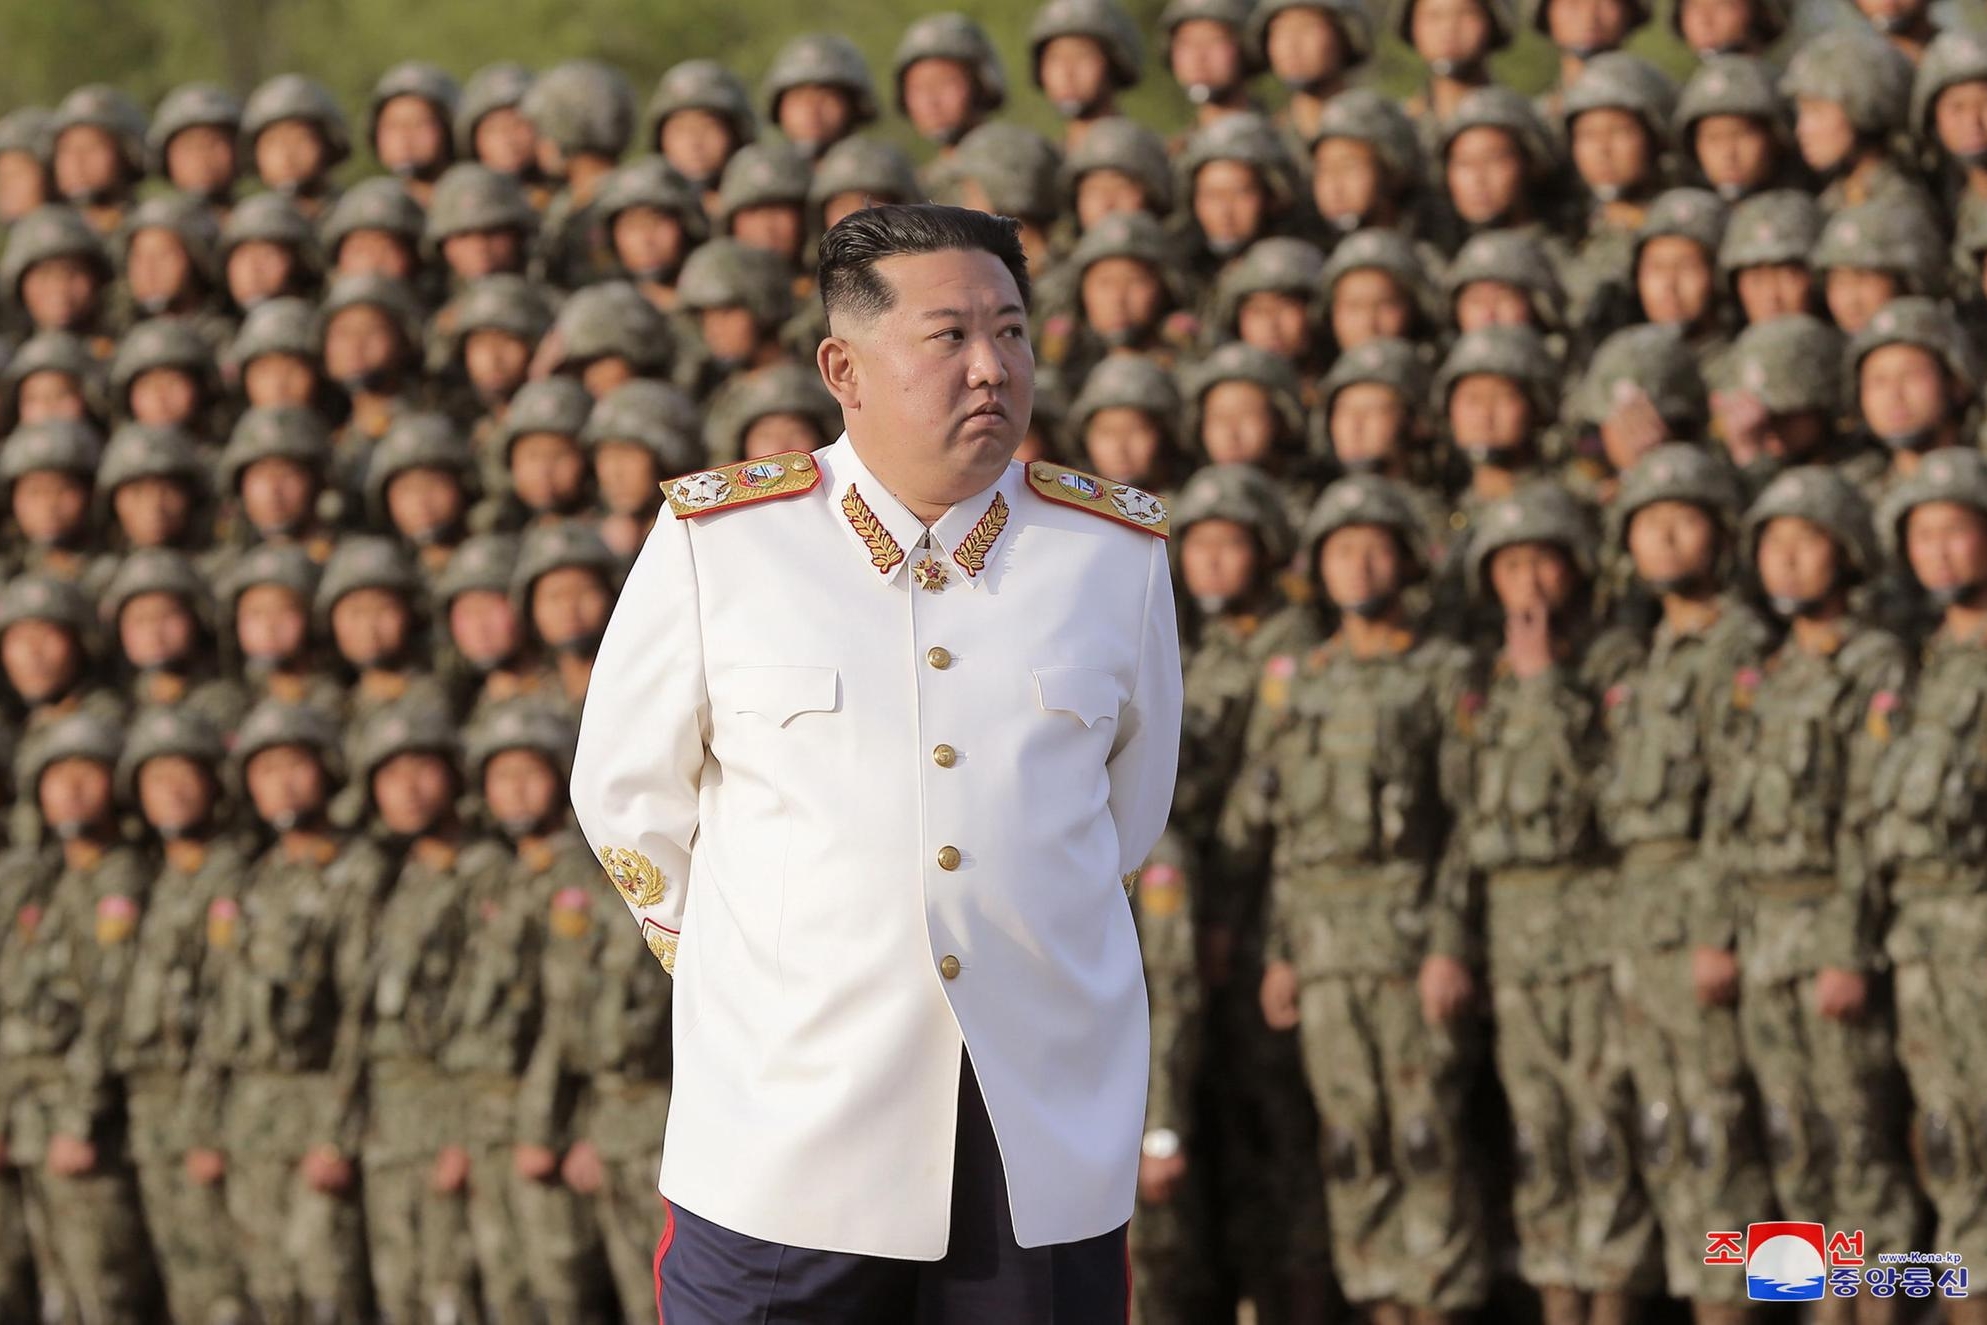 epa09915666 A photo released by the official North Korean Central News Agency (KCNA) shows North Korean Supreme Leader Kim Jong-Un wearing a white marshal uniform, during a photo session with the officers and soldiers that took part in a military parade, in Pyongyang, North Korea, 27 April 2022 (issued 29 April 2022). The soldiers participated in a military parade in Pyongyang on April 25 to mark the 90th anniversary of the Korean People's Revolutionary Army. EPA/KCNA EDITORIAL USE ONLY